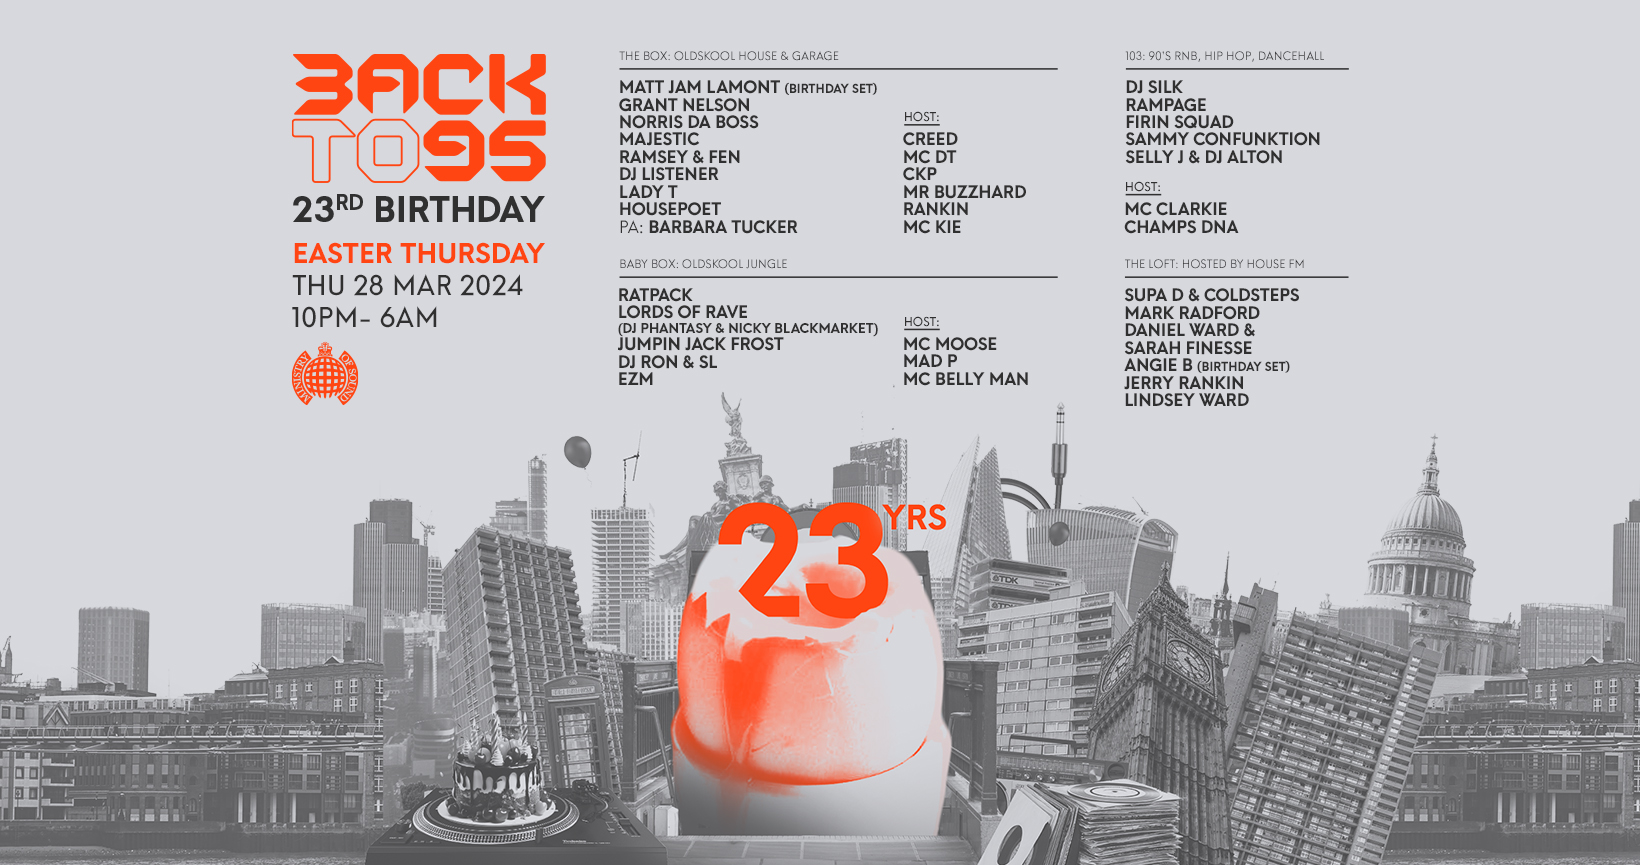 On Easter Thursday, 28th March, we will be hosting our 23rd Birthday celebration at London's iconic Ministry of Sound, with an incredible line-up over four rooms of music. Once again, we will be taking you back to the original Oldskool vibe and party atmosphere.